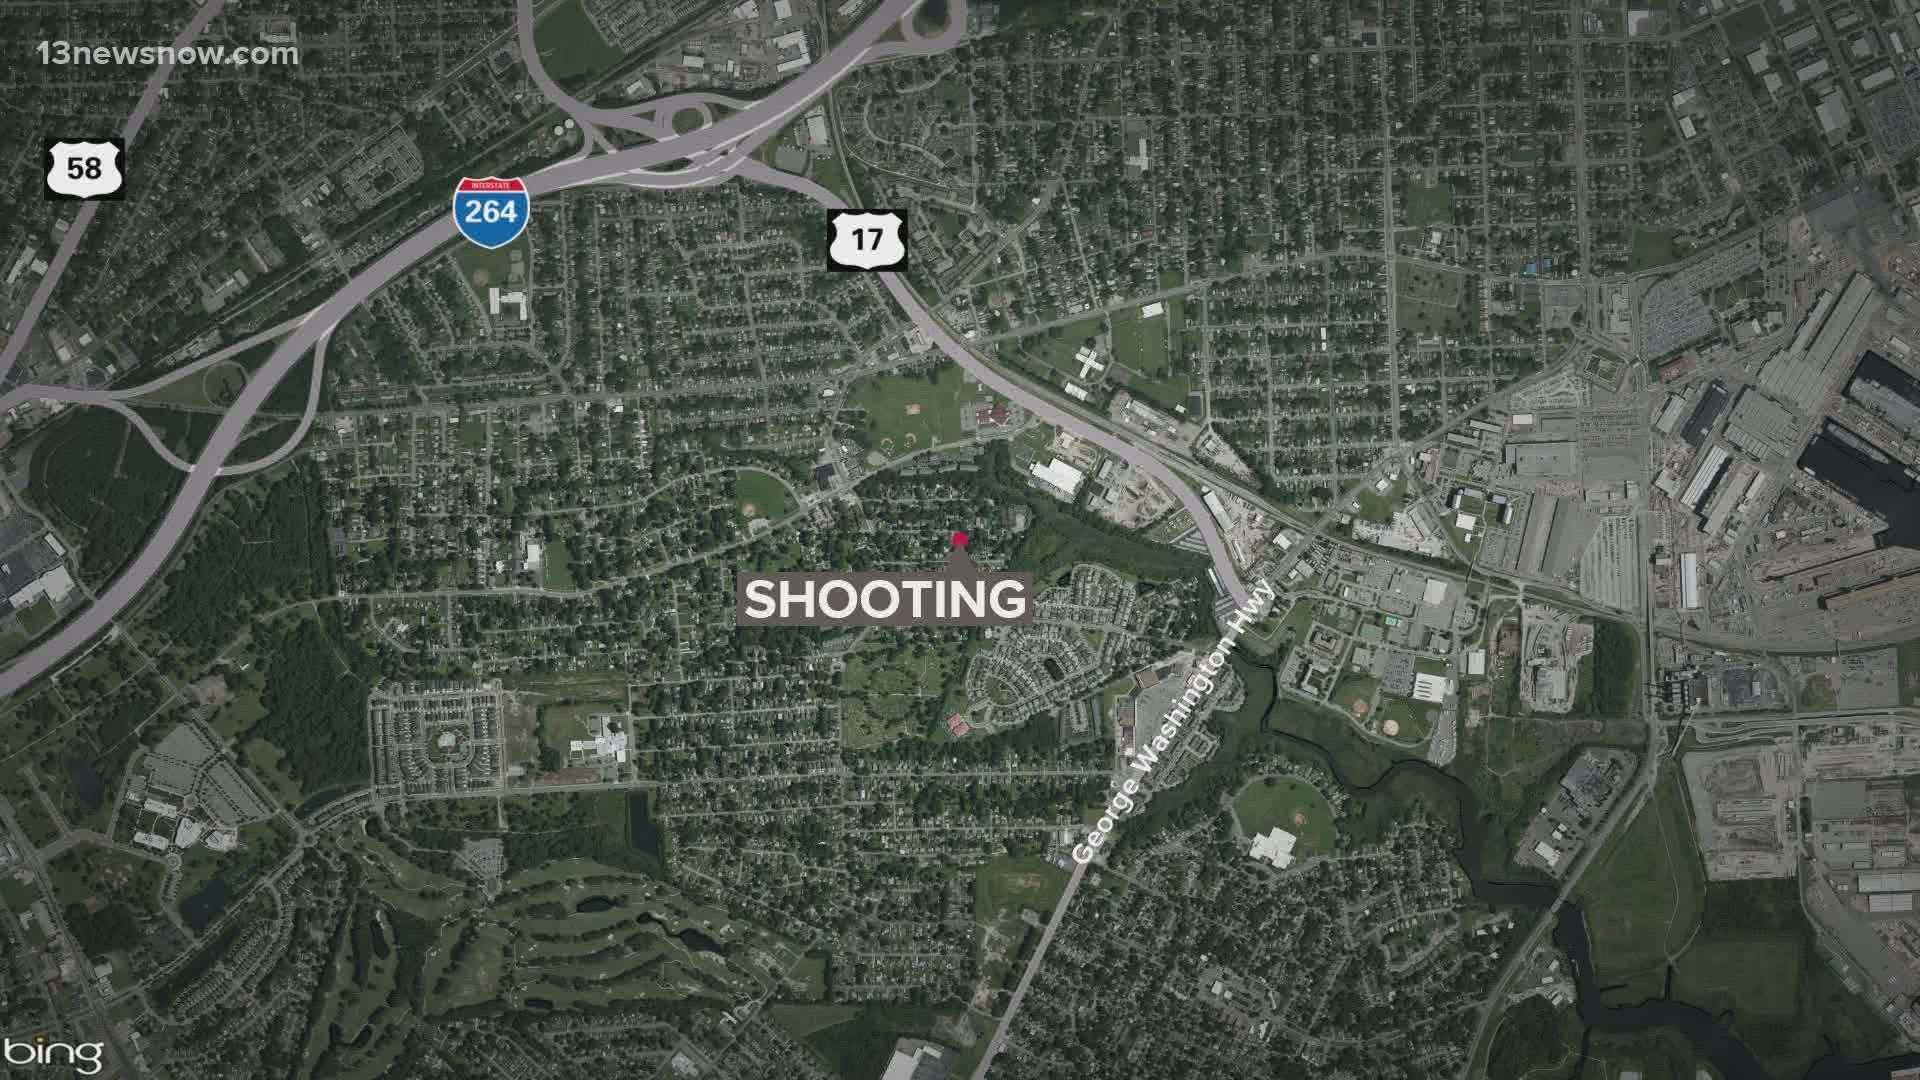 The call about the shooting came in shortly before 2:30 a.m. this morning.